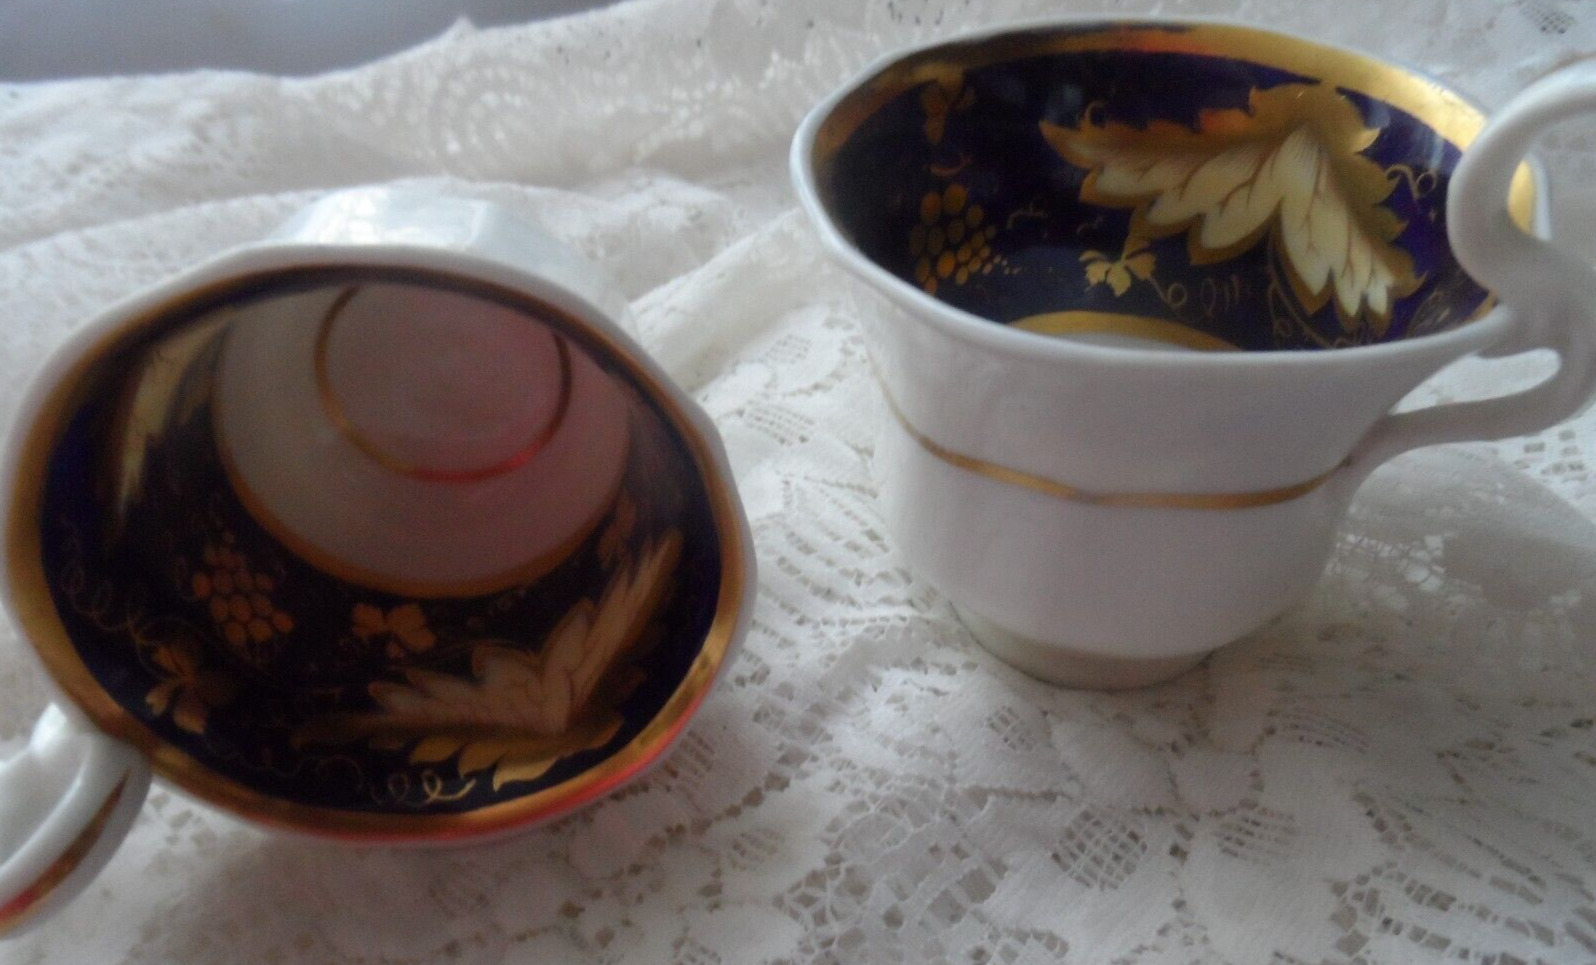 Collectible Cups - 2 DEMITASSE/ESPRESSO CUPS - BLUE & WHITE w/GOLD ACCENTS